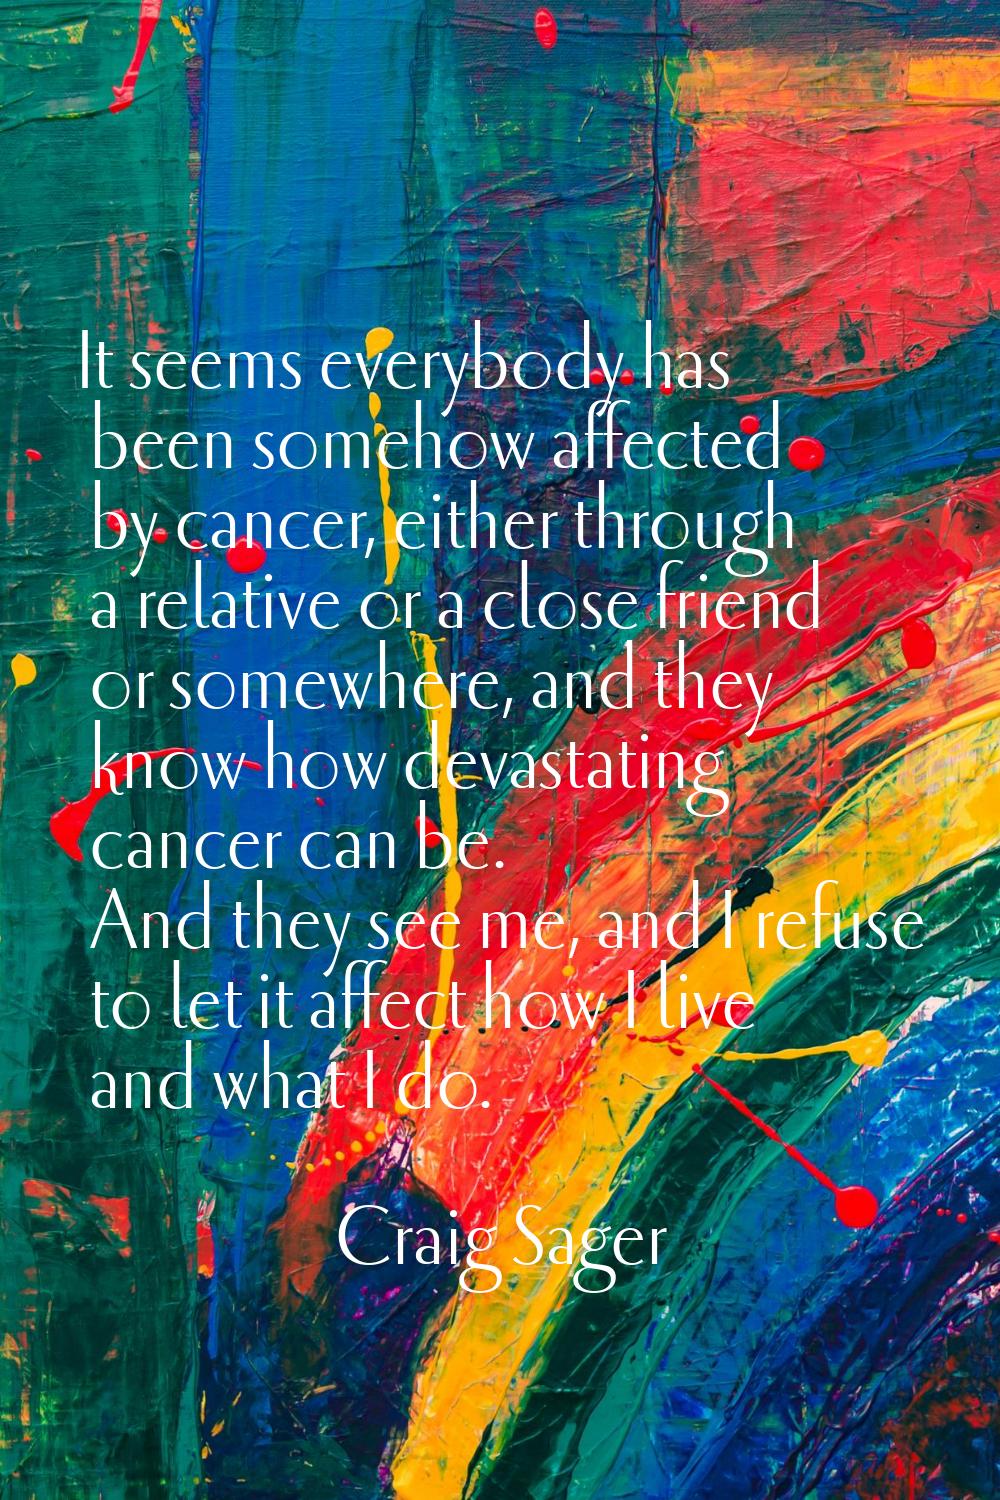 It seems everybody has been somehow affected by cancer, either through a relative or a close friend